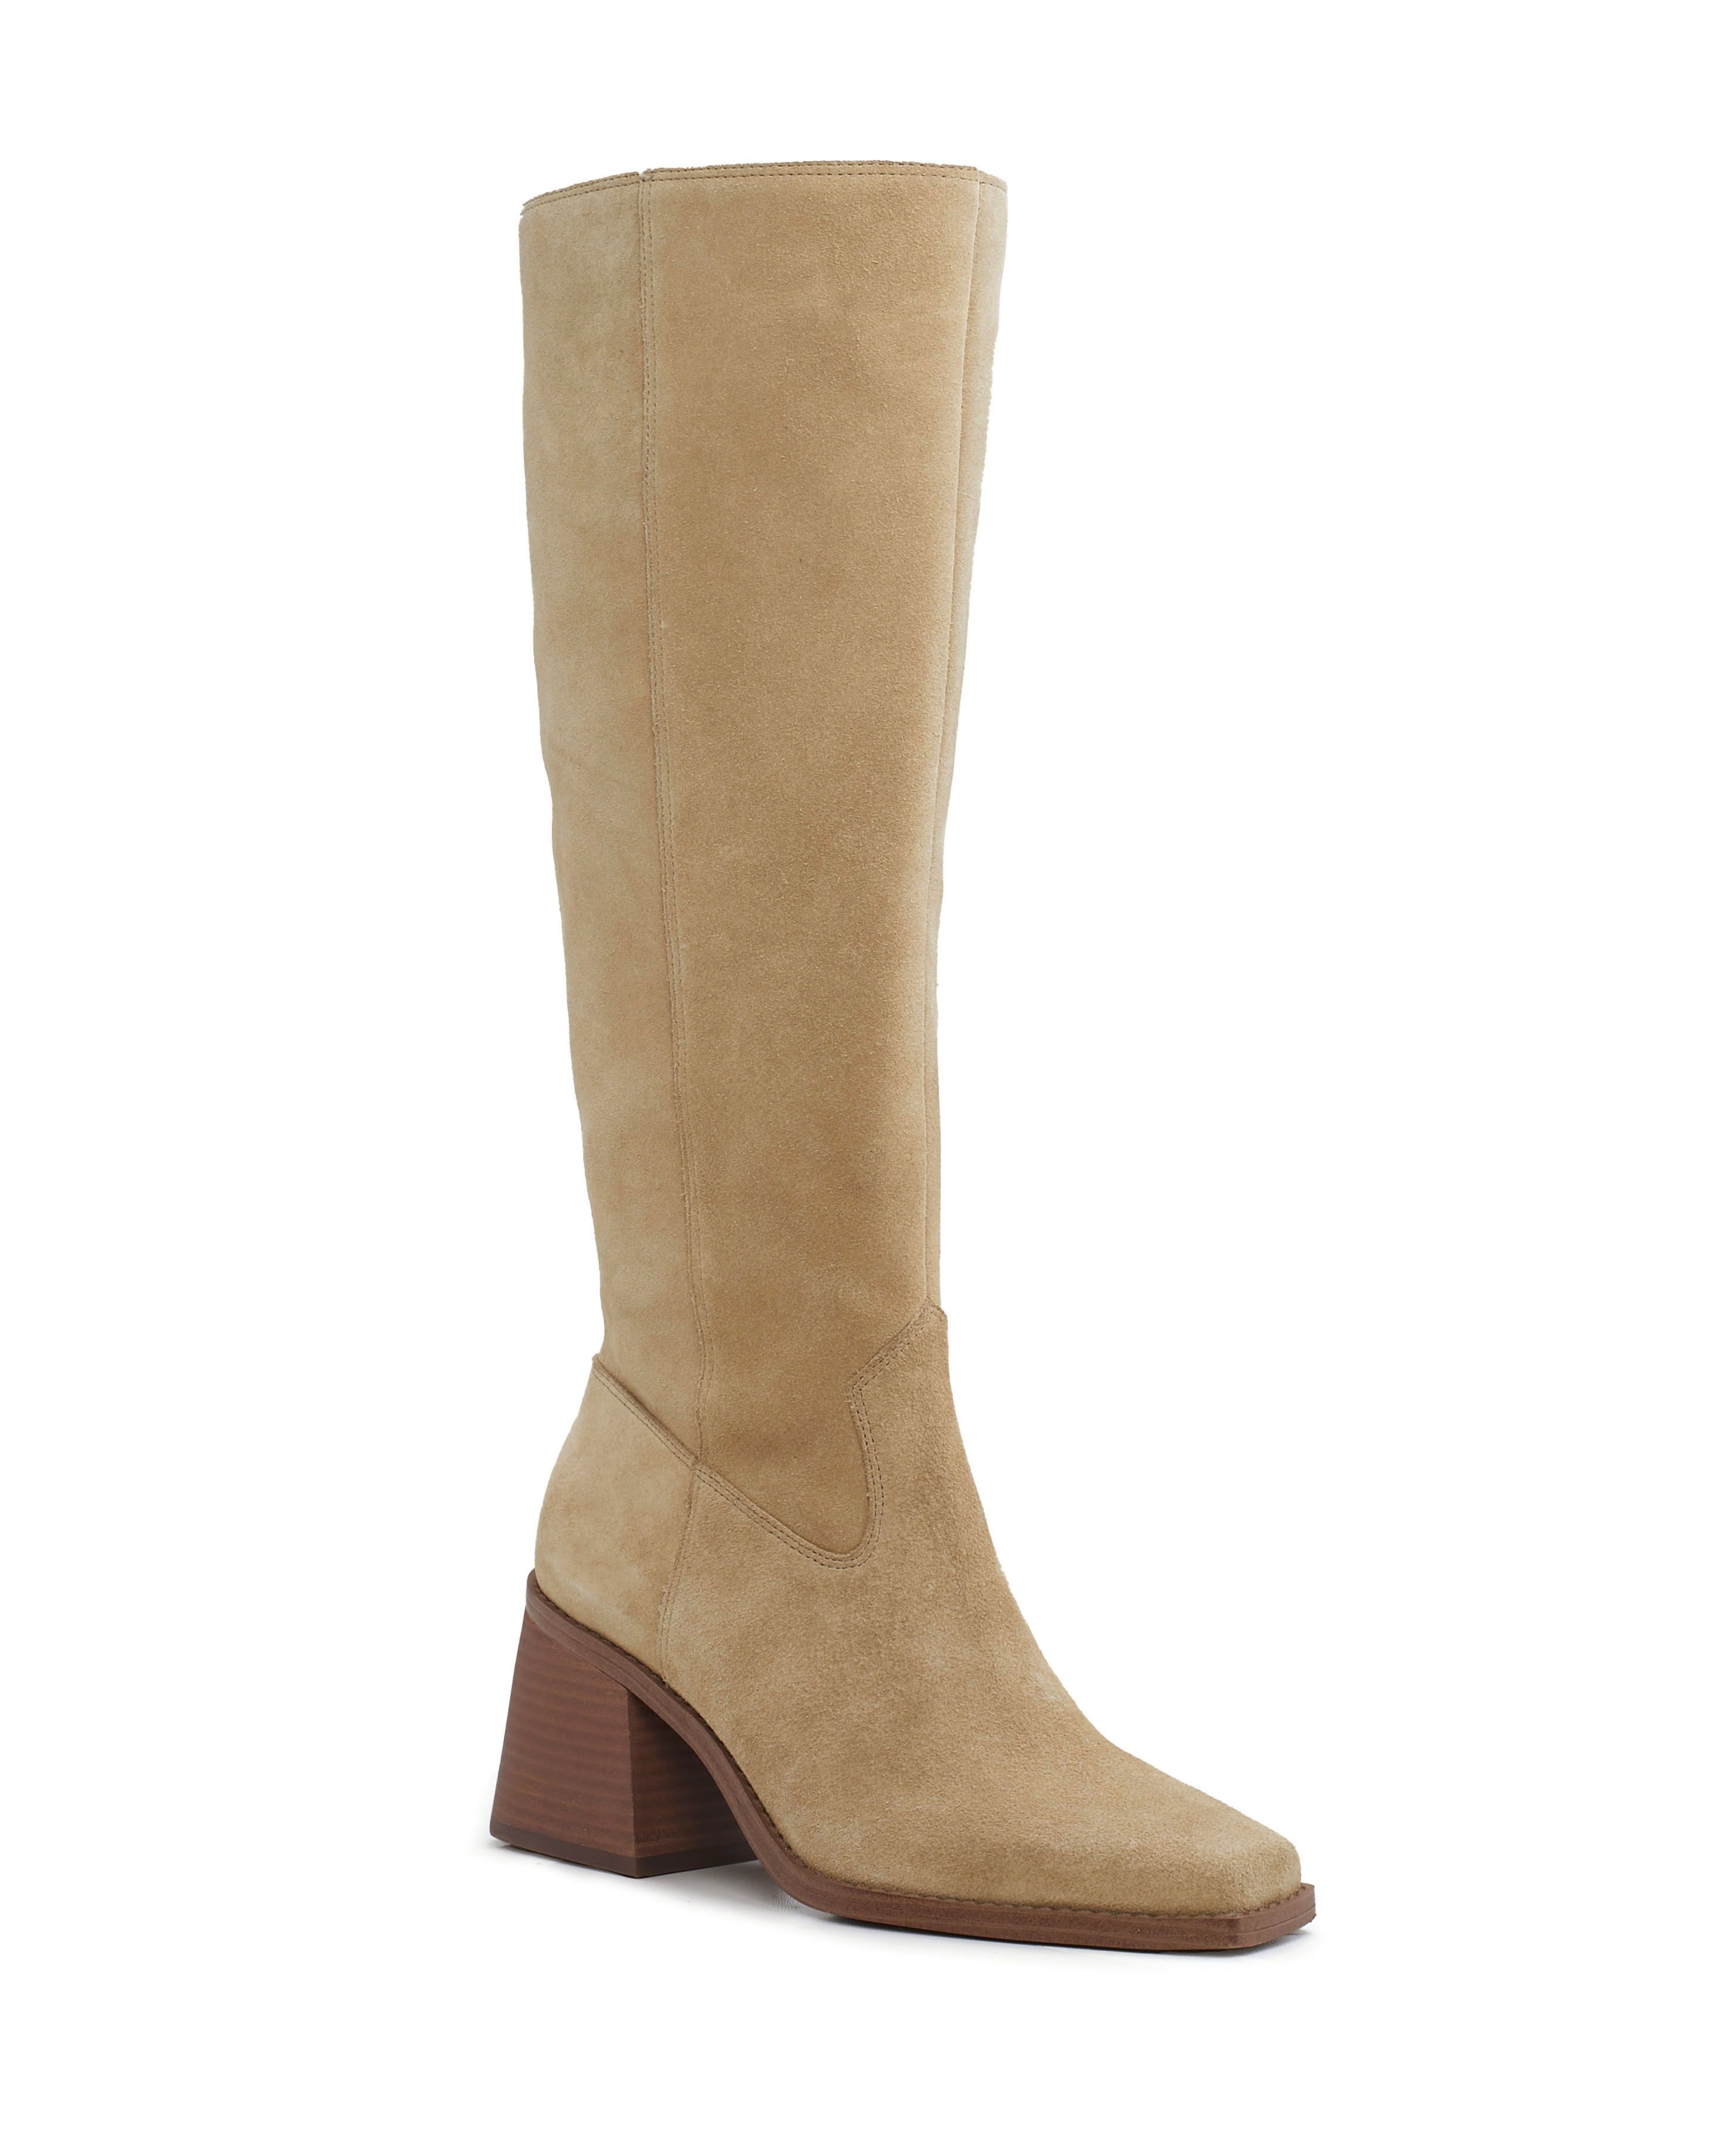 Vince Camuto Sangeti Boot | Vince Camuto